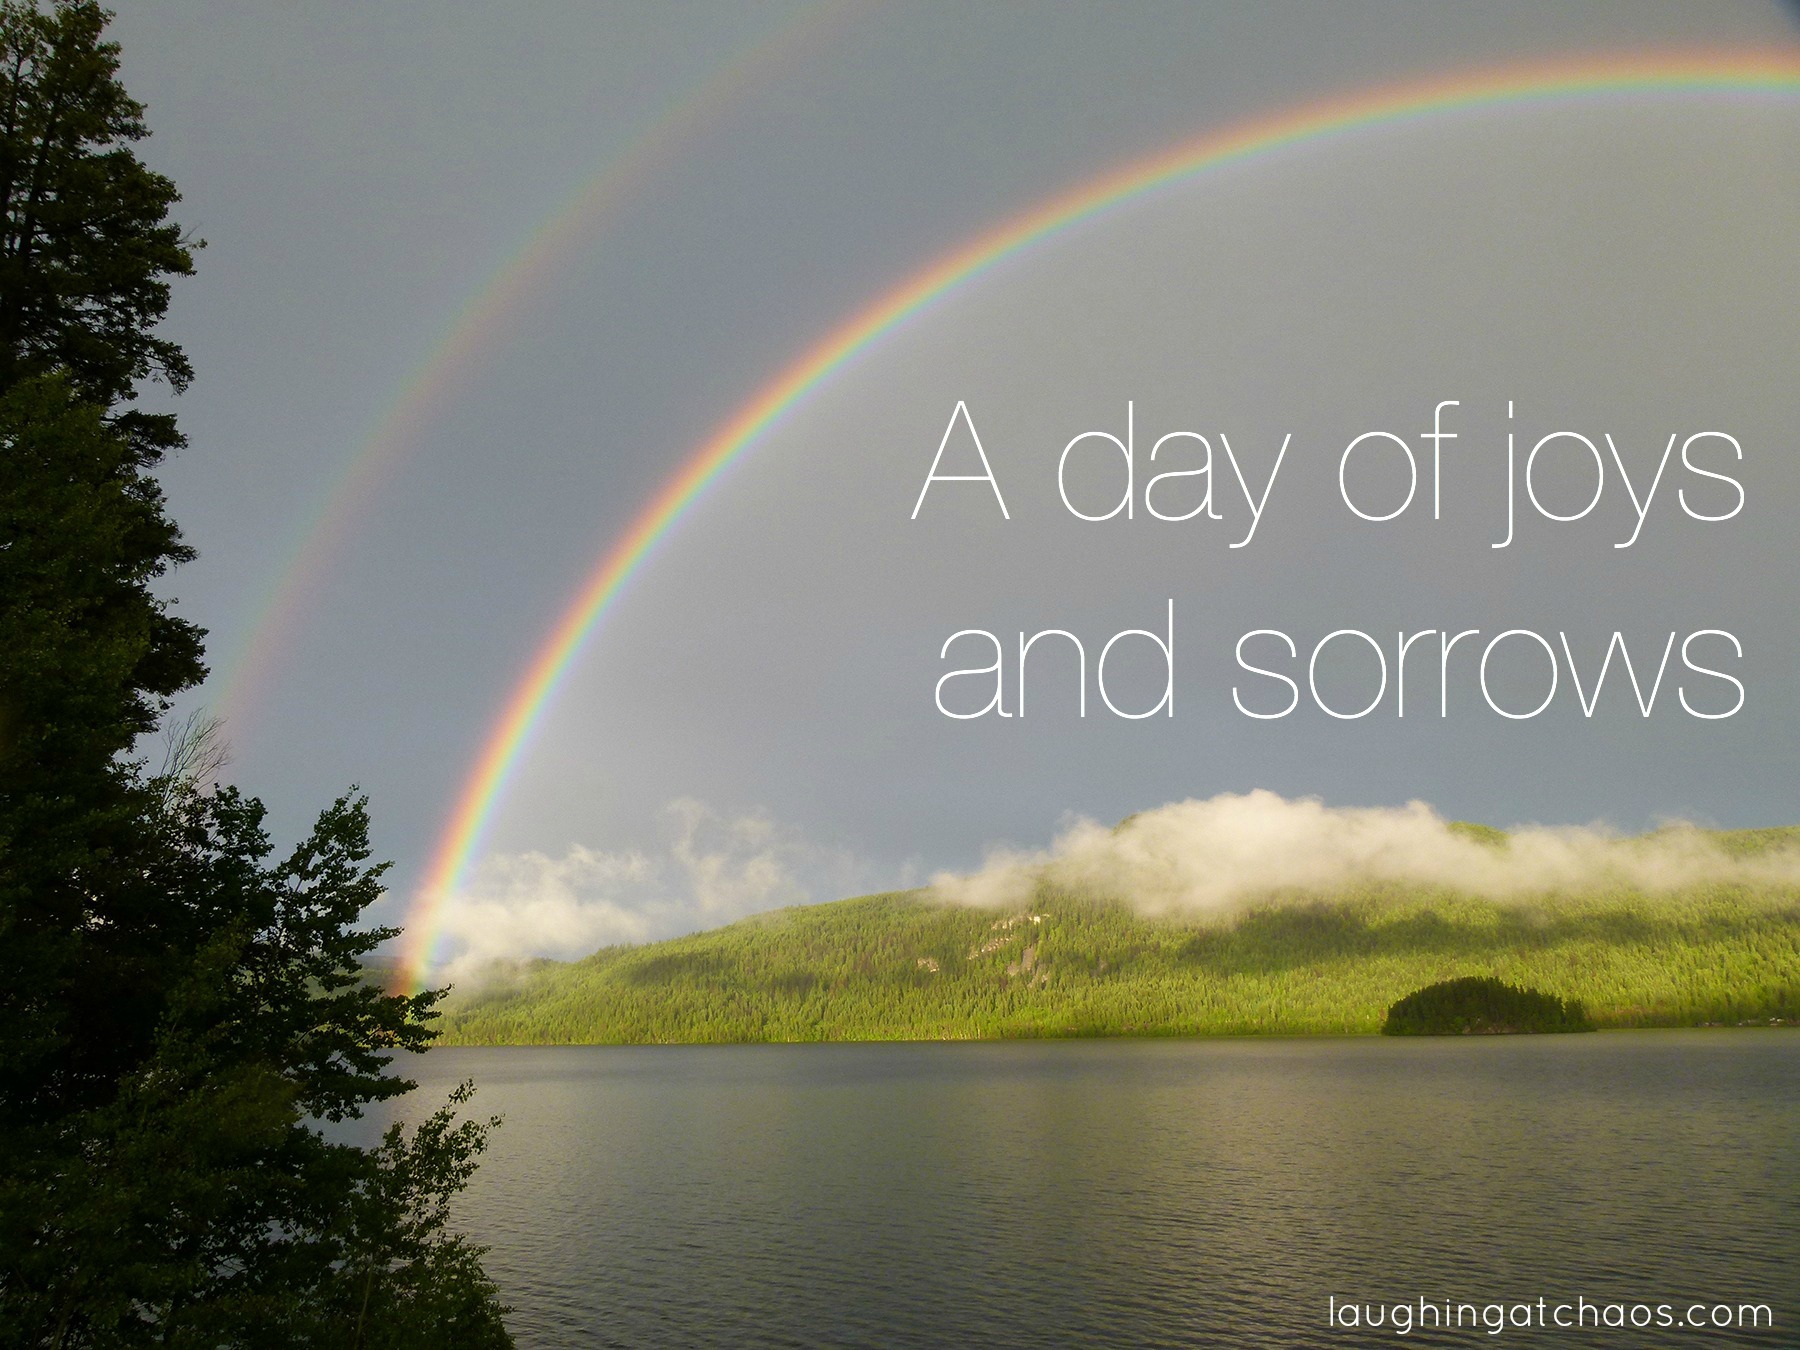 A day of joys and sorrows